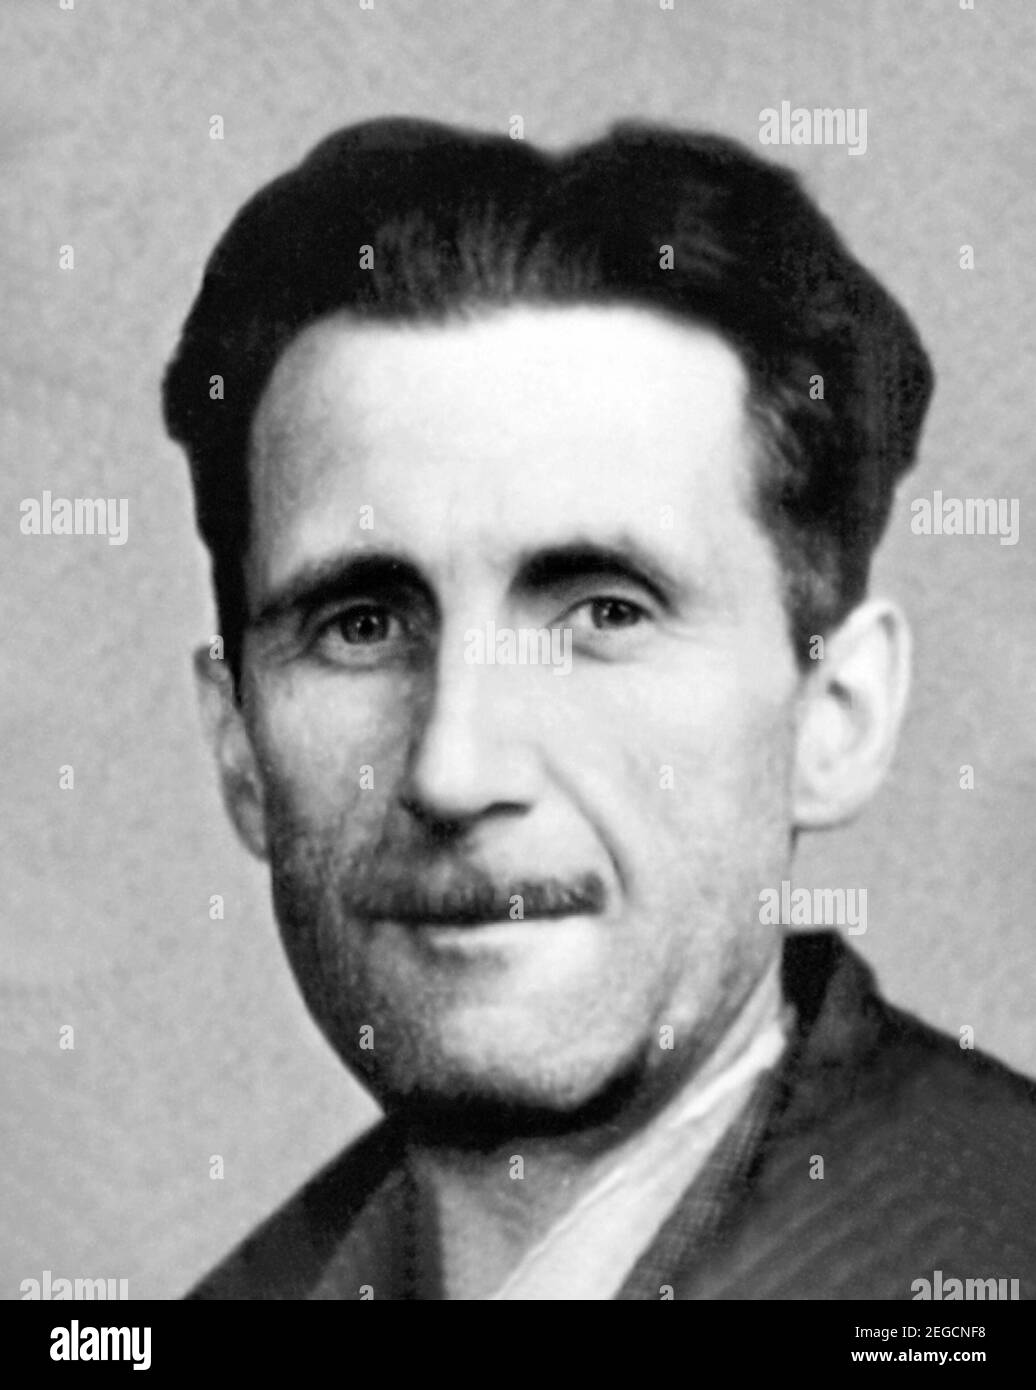 George Orwell. Portrait of the English novelist and journalist, Eric Arthur Blair ( 1903- 1950), from a 1943 press card. Stock Photo